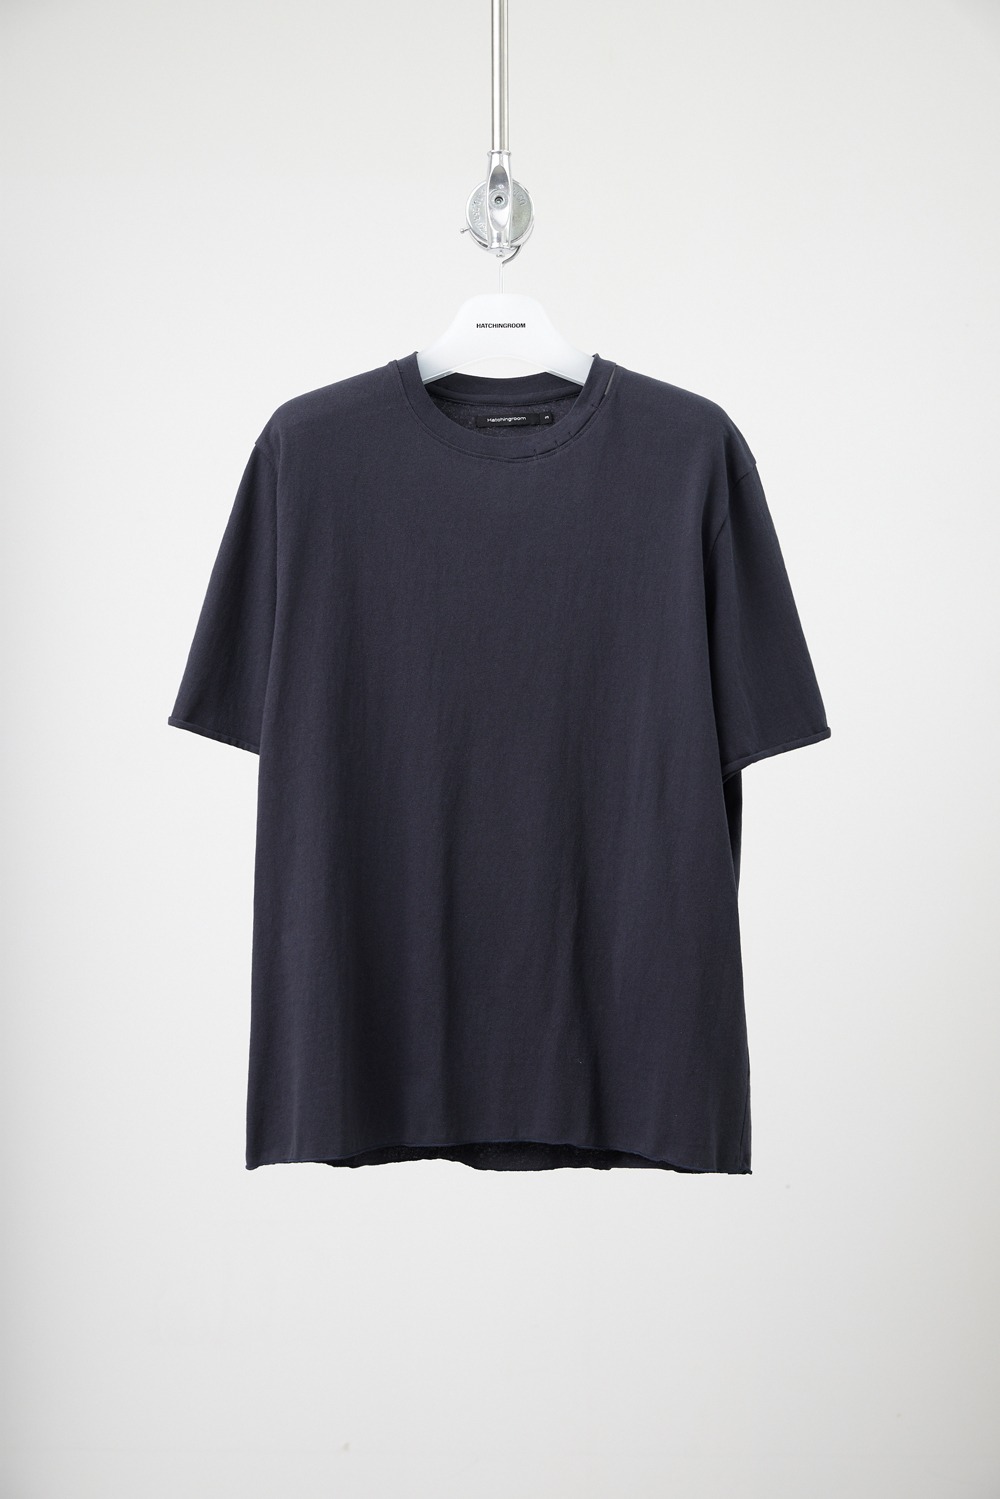 Tooth Tee Blue Charcoal